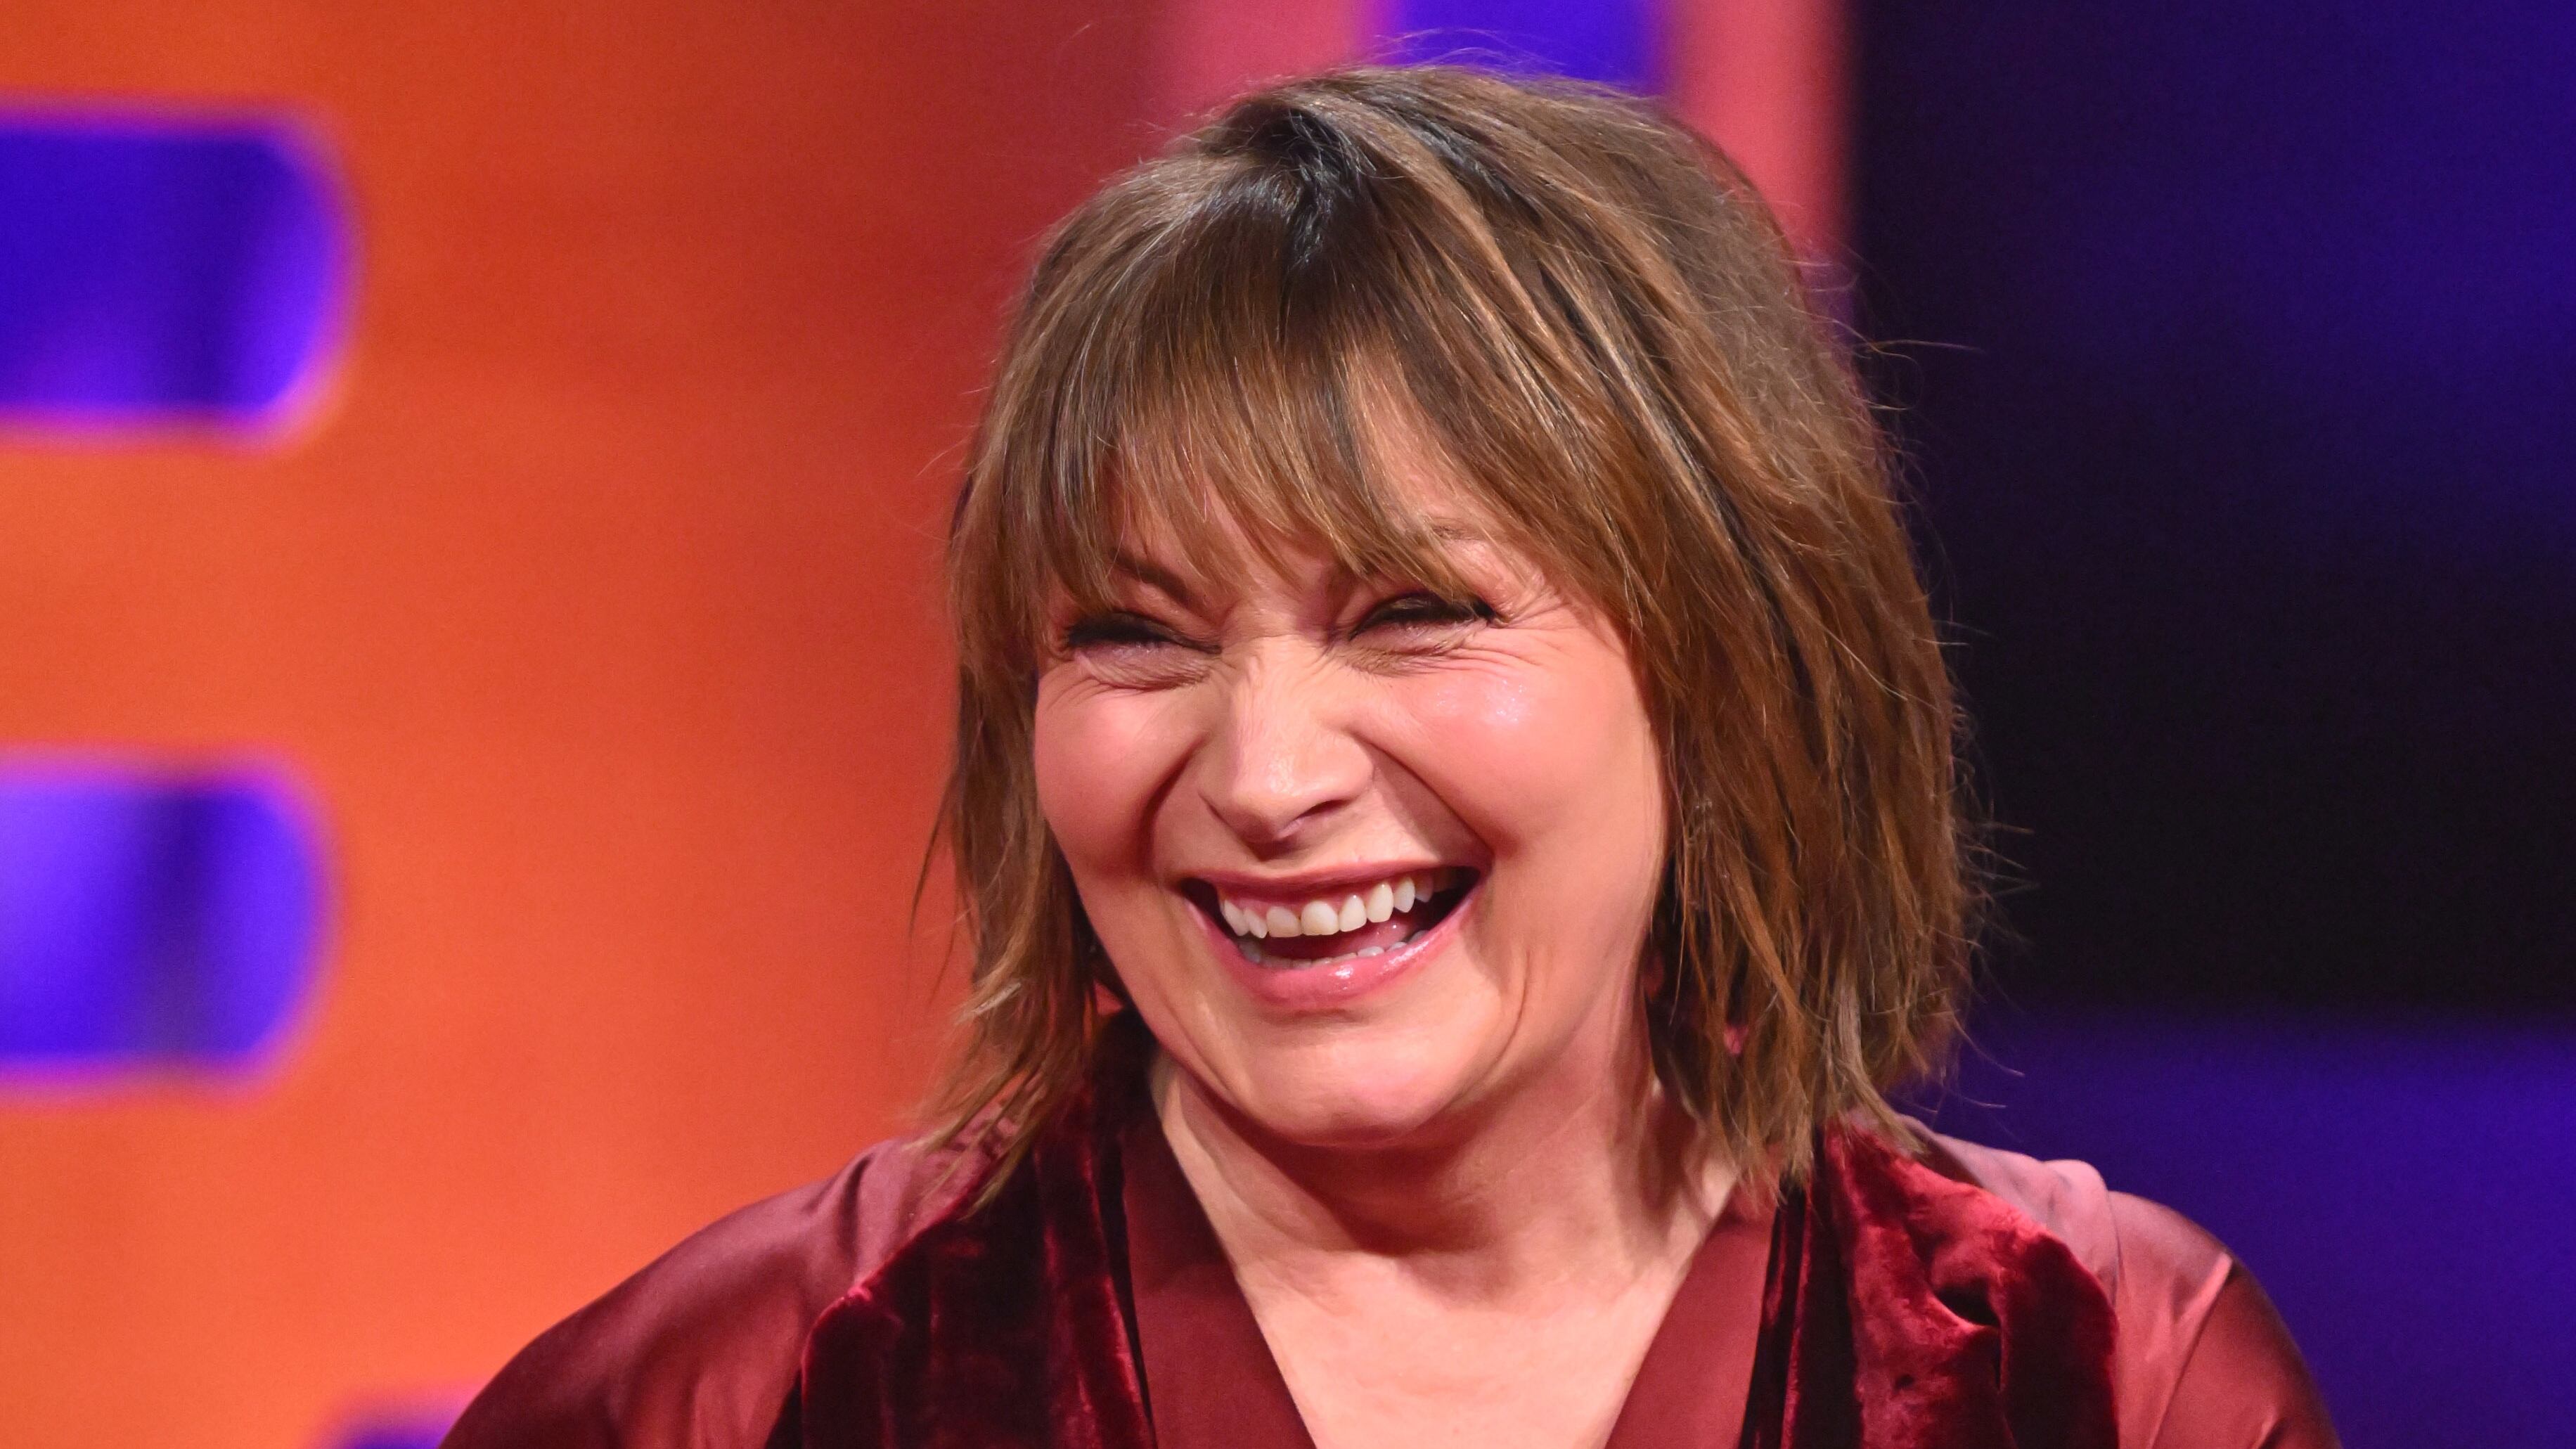 Lorraine Kelly said the opportunities she had when breaking into the media industry do not exist for young people today